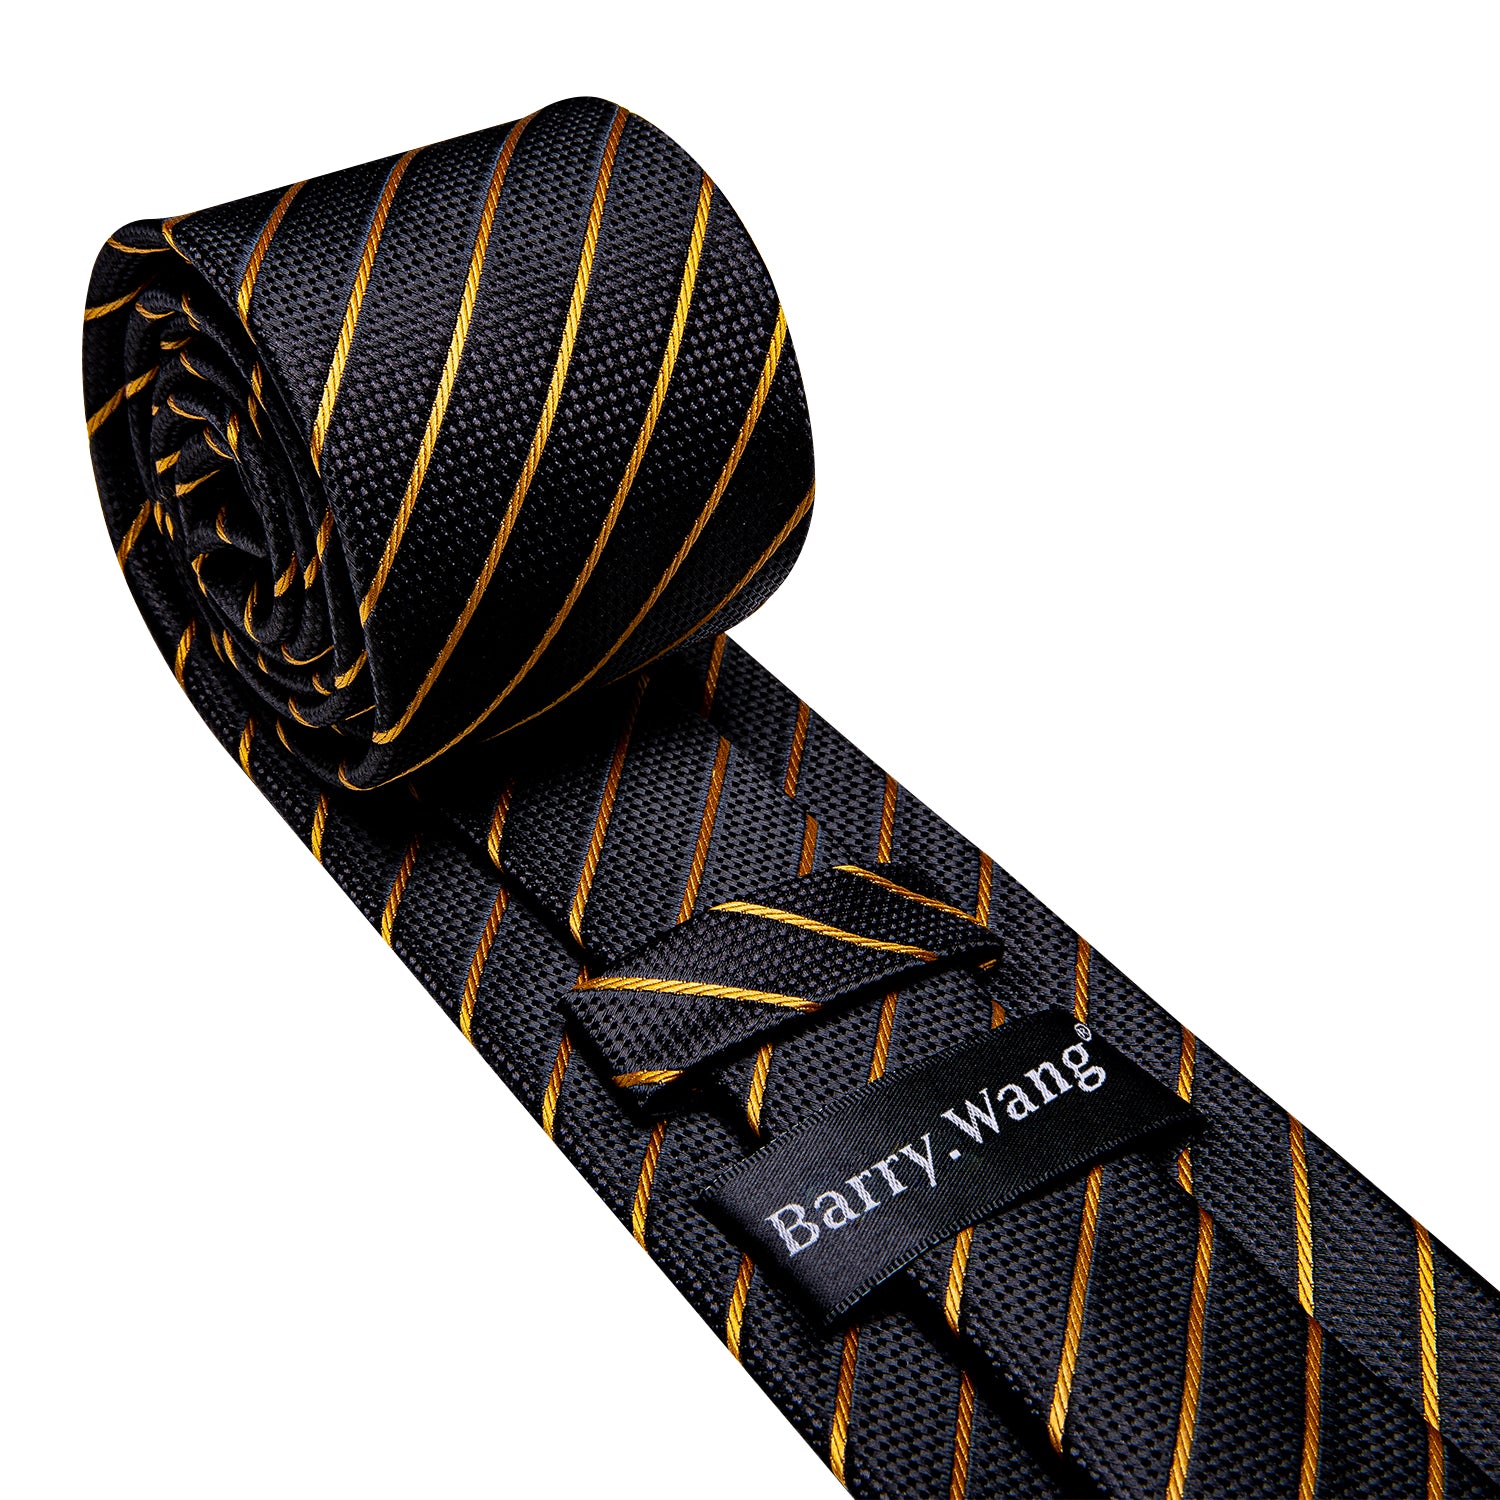 Barry.wang Black Tie Gold Stripe Men's Silk Tie Pocket Square Cufflinks Set with Brooches